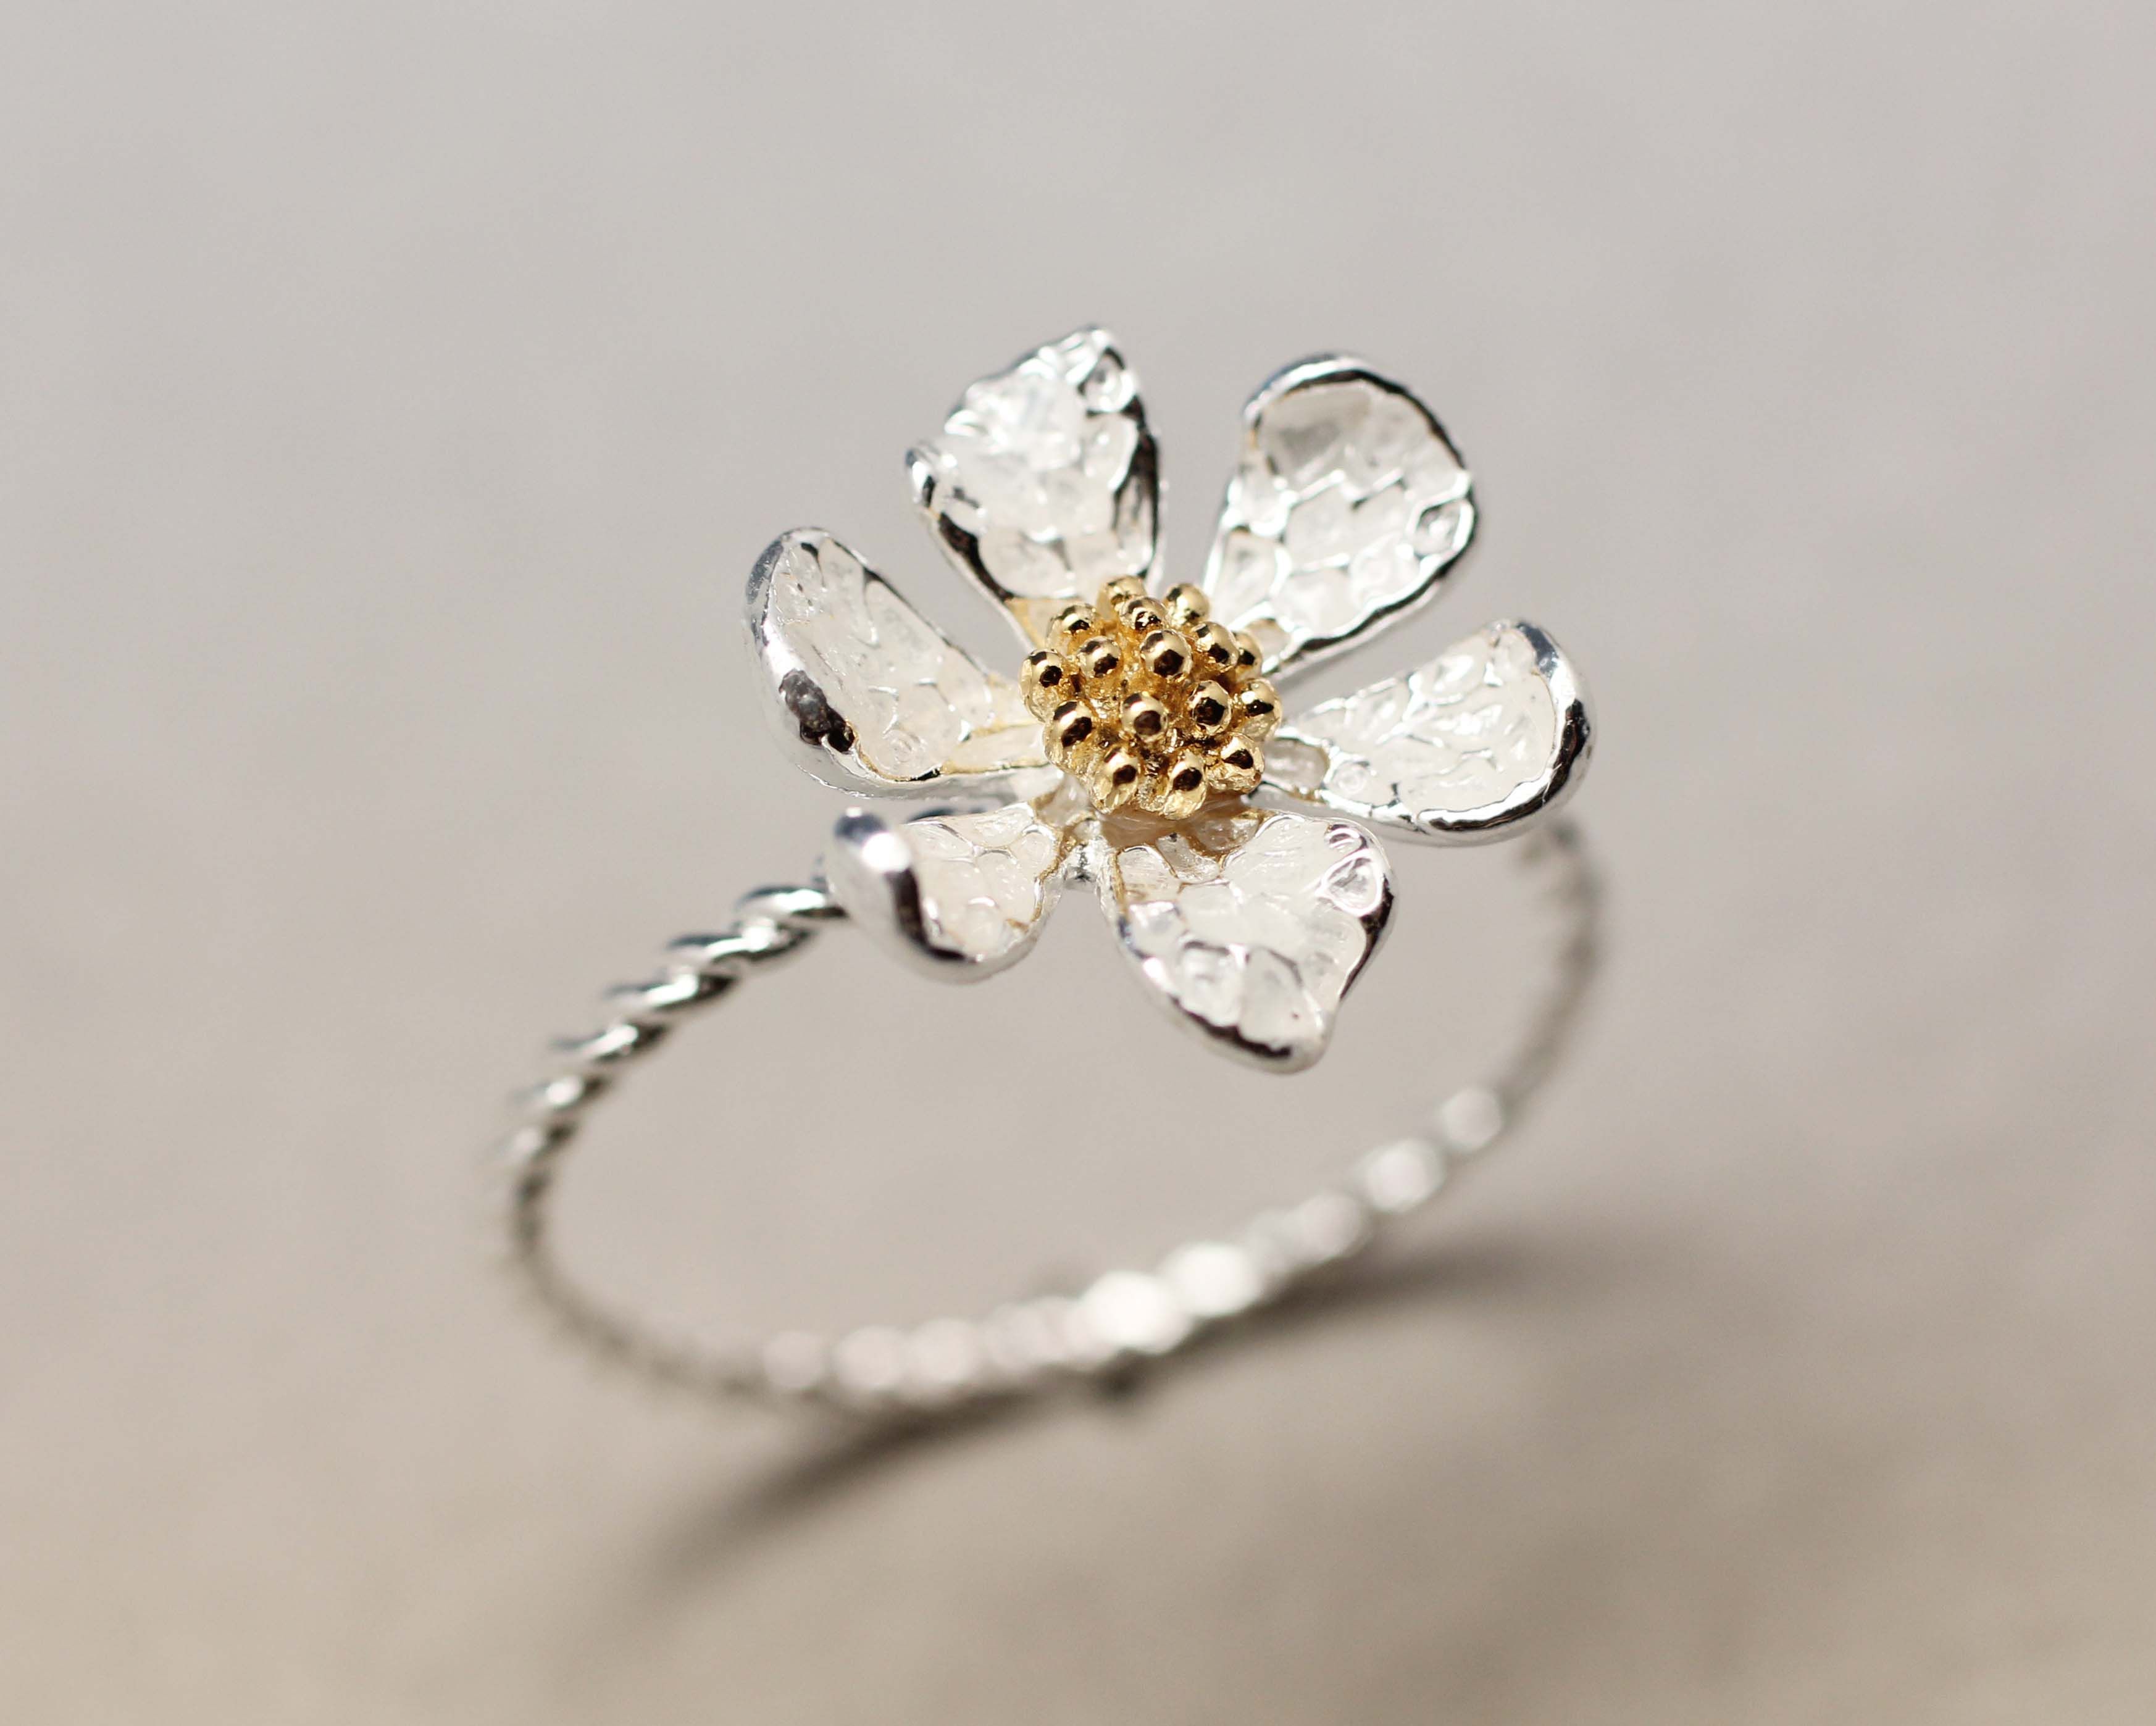 Danity White Daisy Flower Ring Within Recent Daisy Flower Rings (View 1 of 25)